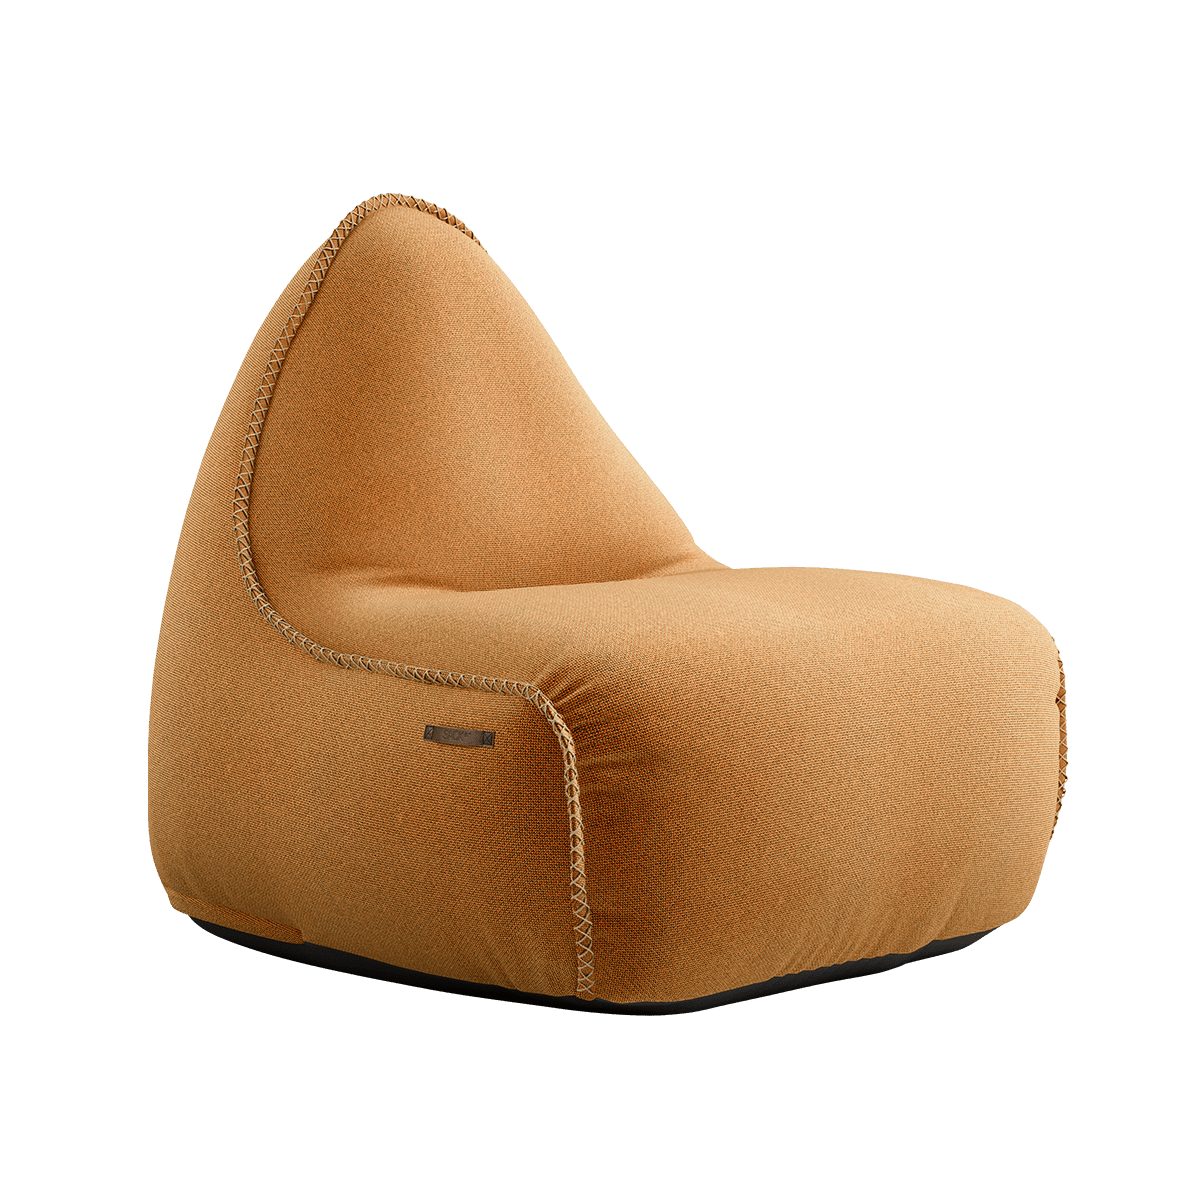 variant_8567102% | Cura Lounge Chair [Contract] - Cura Curry | SACKit